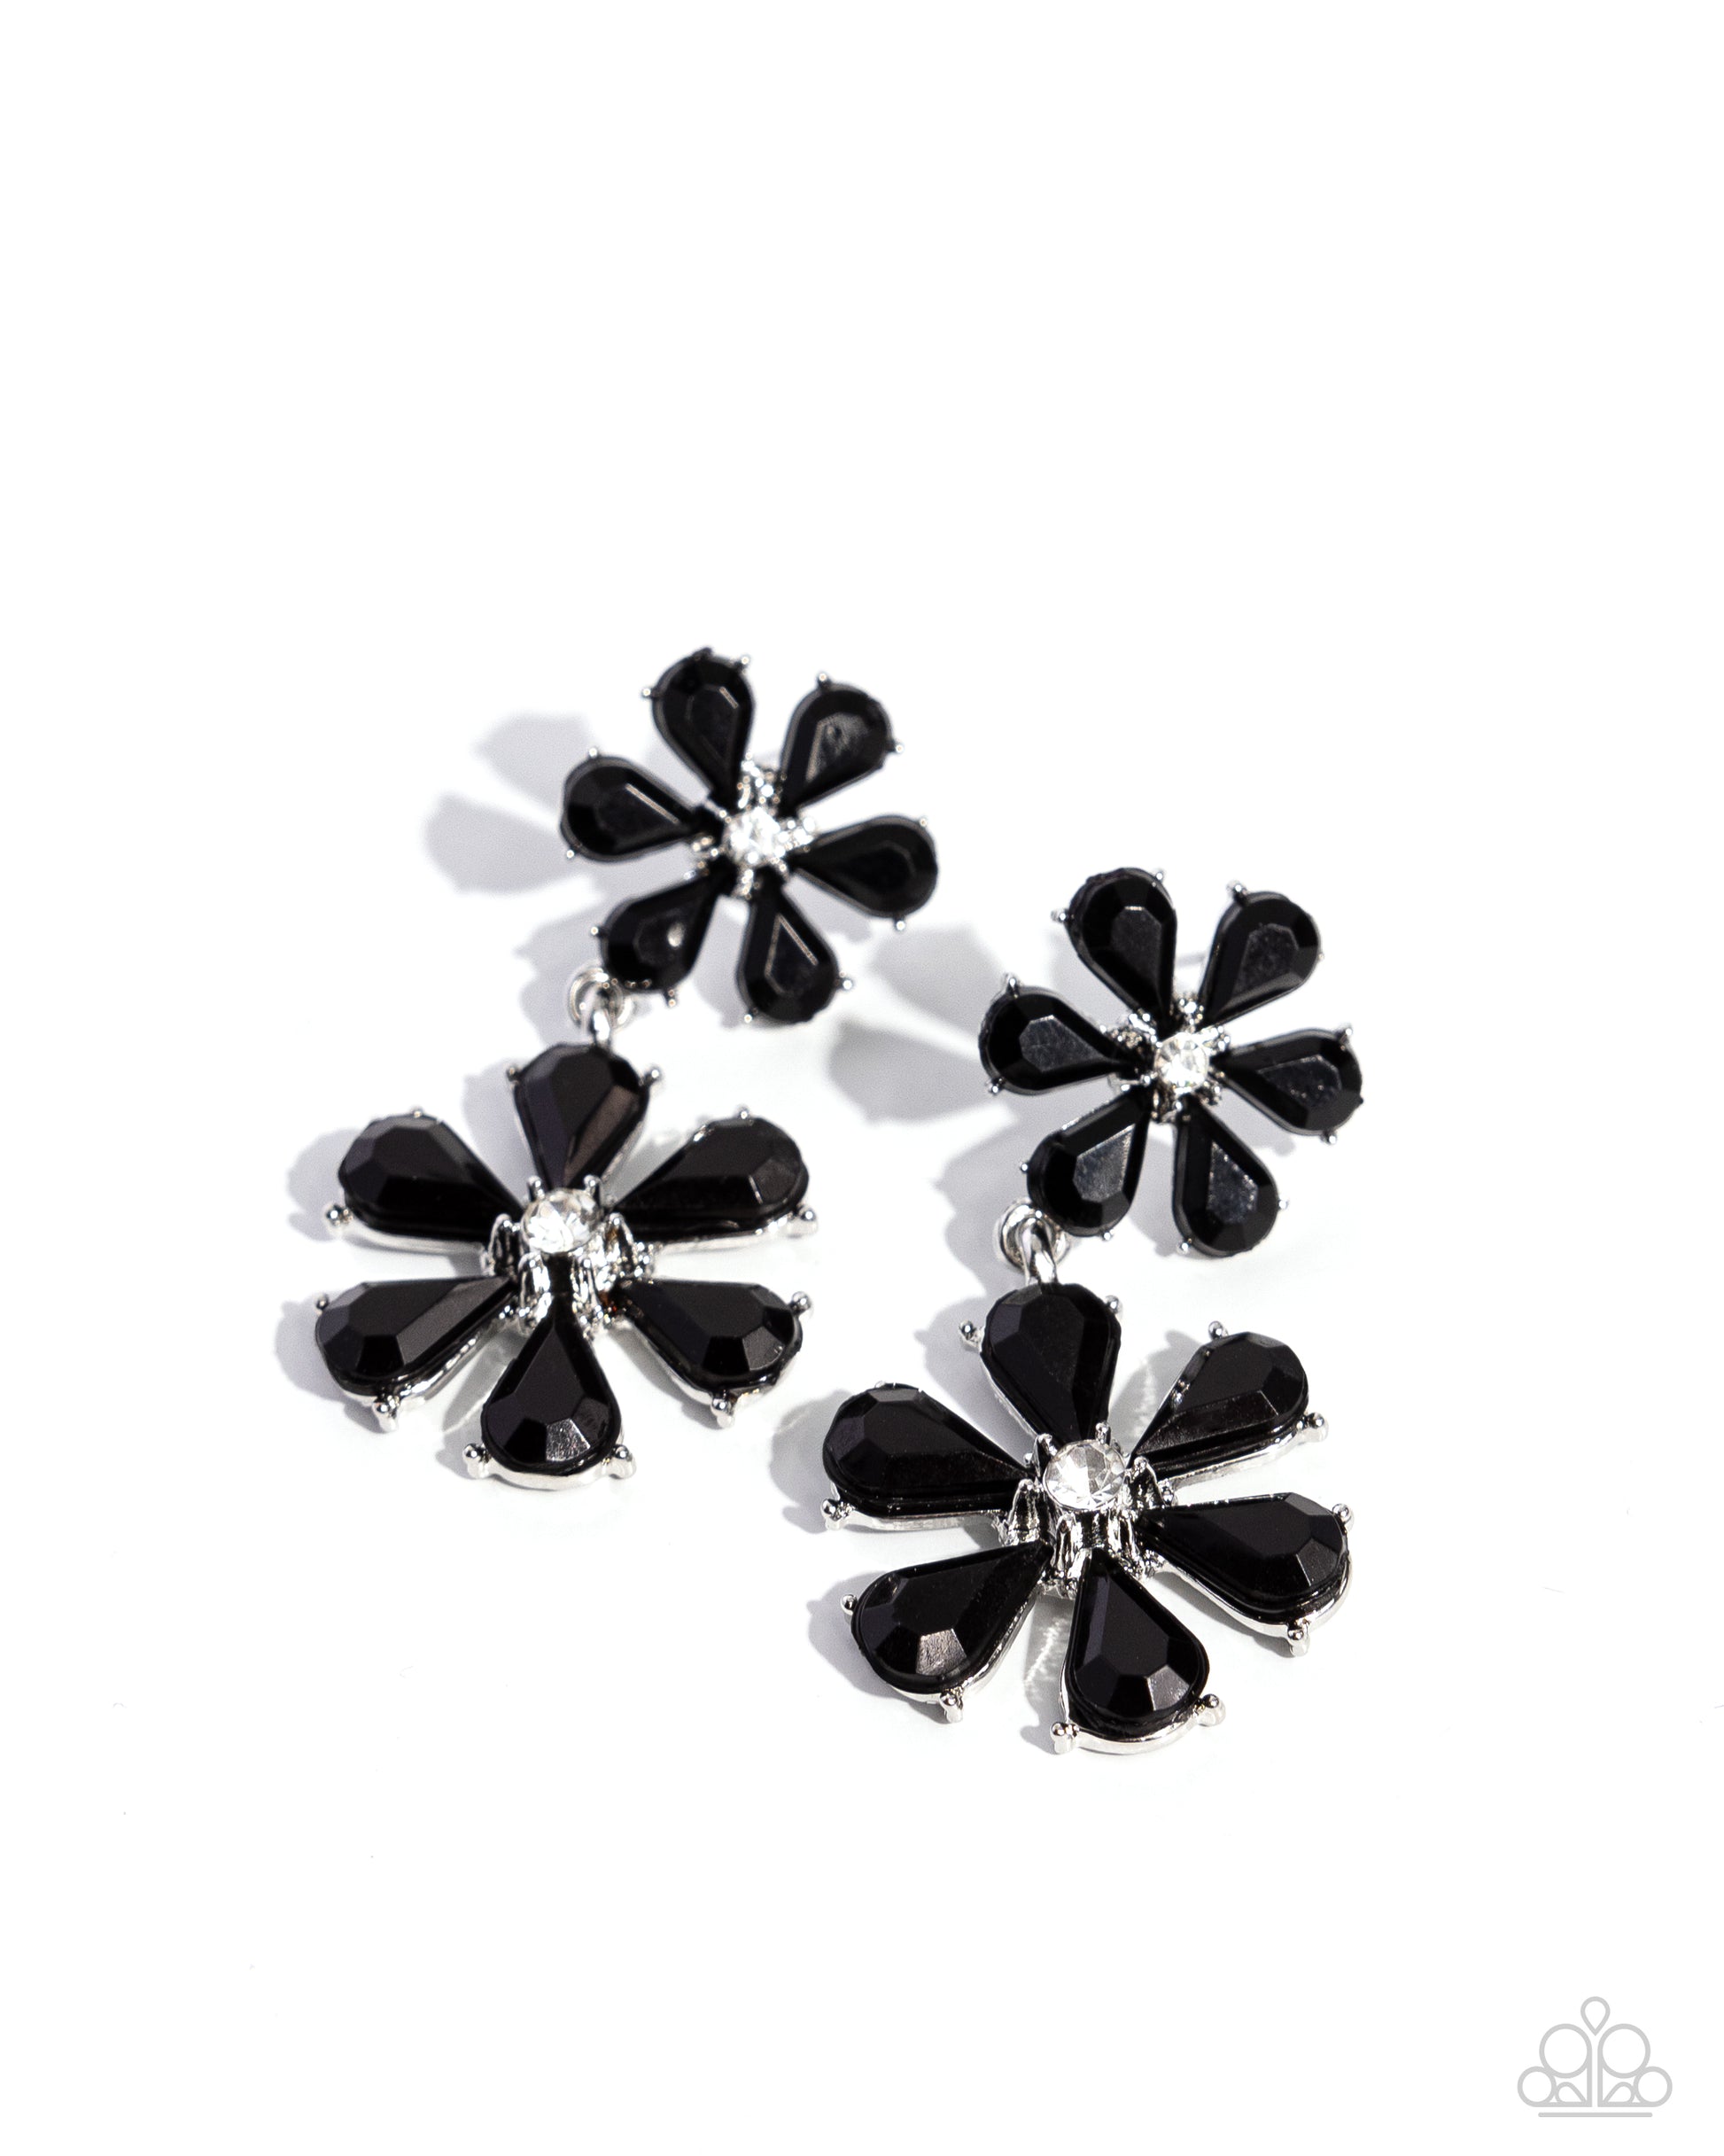 A Blast of Blossoms - black - Paparazzi earrings